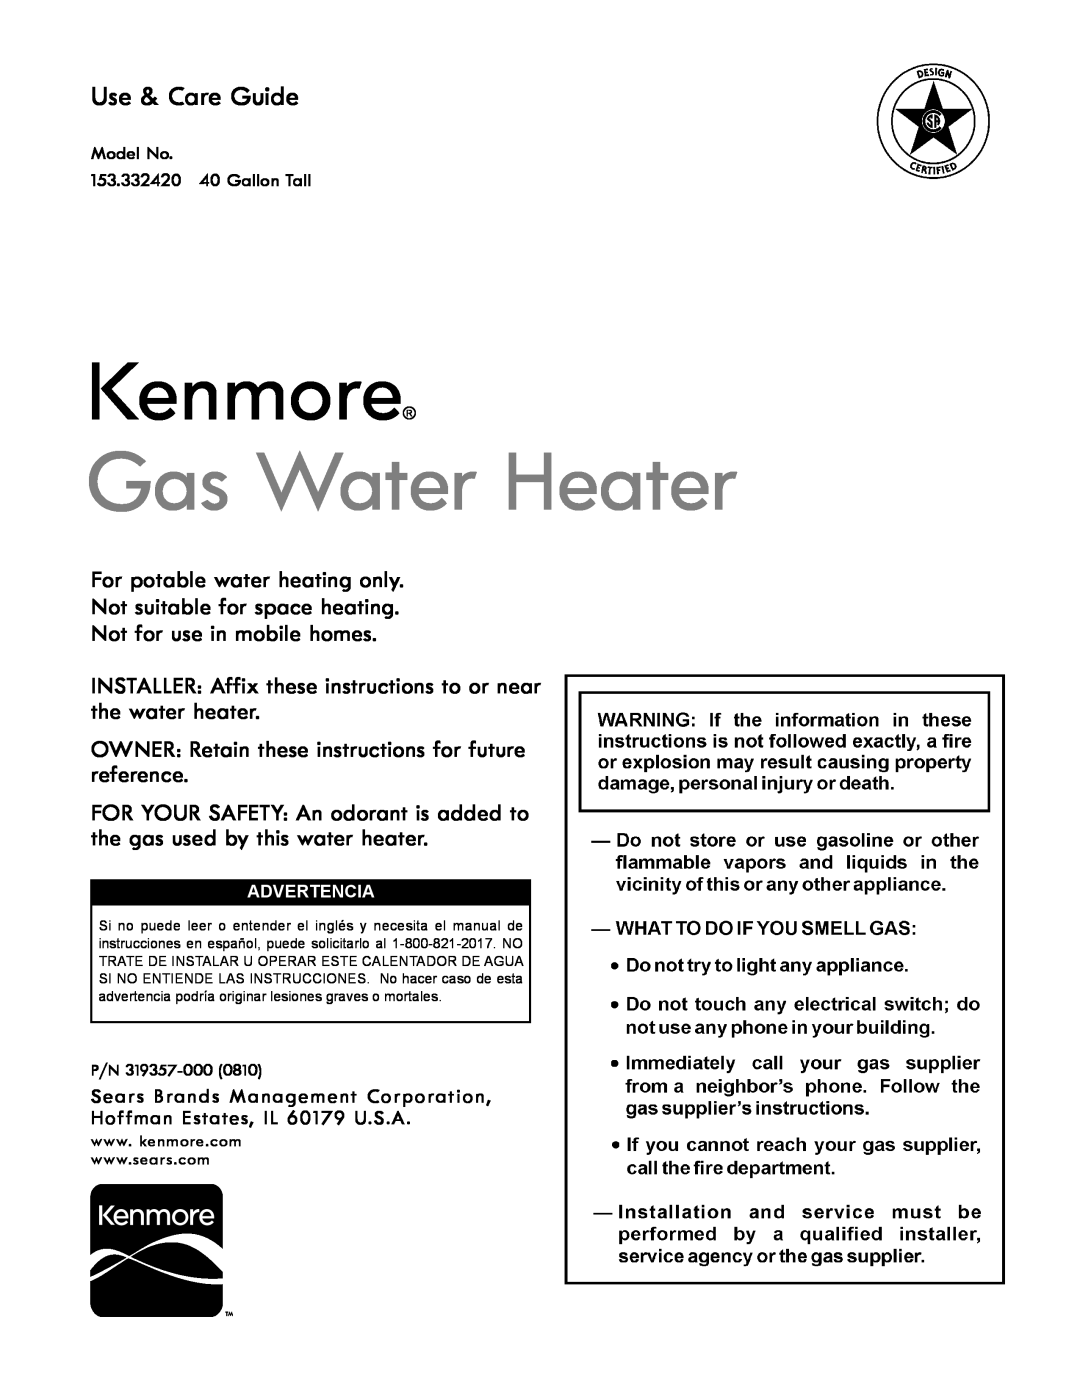 Kenmore 153.332.410 manual Use & Care Guide, For potable water heating only, Not suitable for space heating, Kenmore 